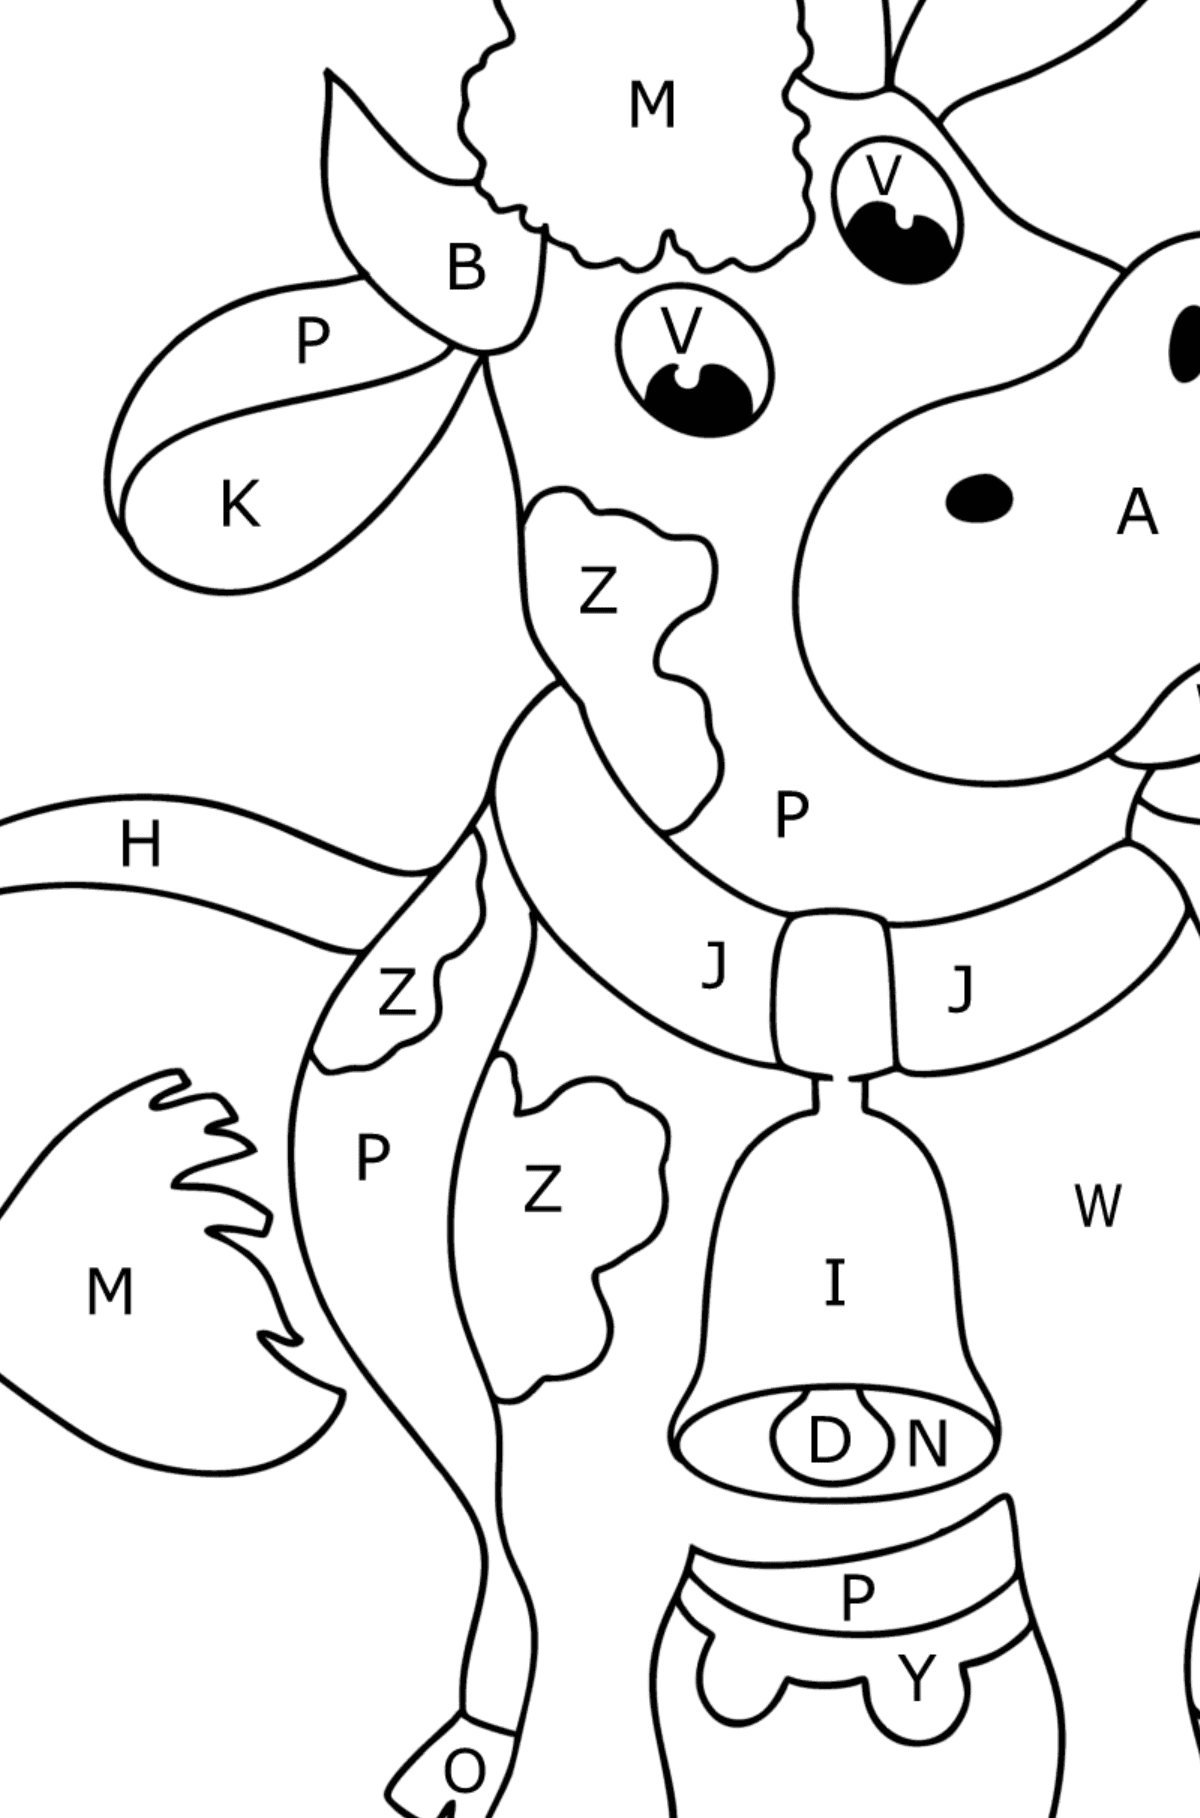 Coloring page cow with a bell - Coloring by Letters for Kids